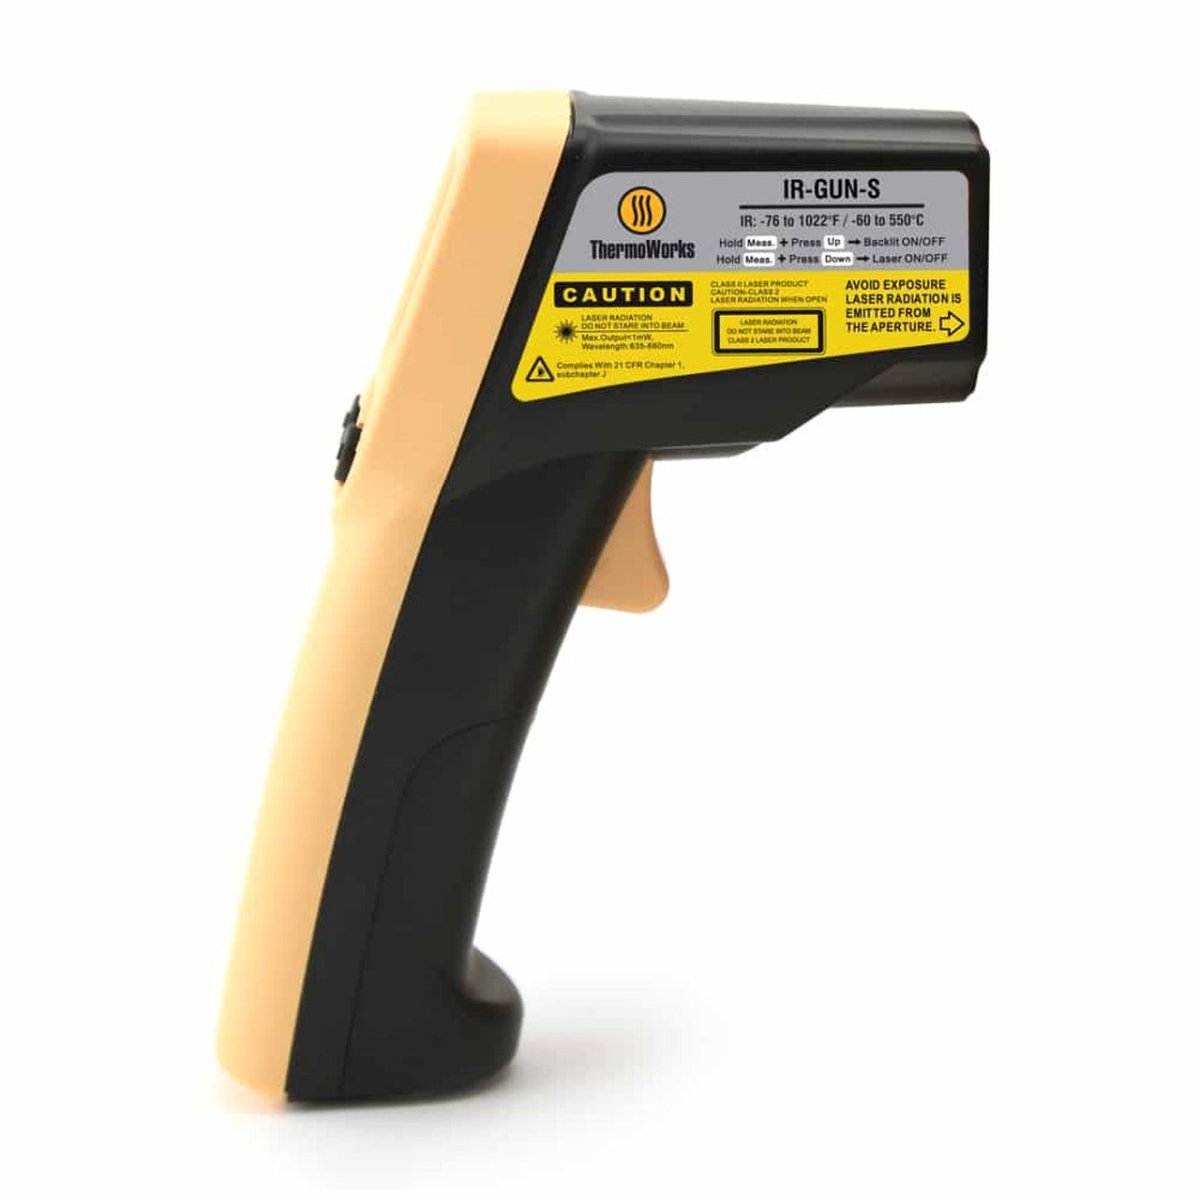 Gozney Infrared Thermometer AD1599